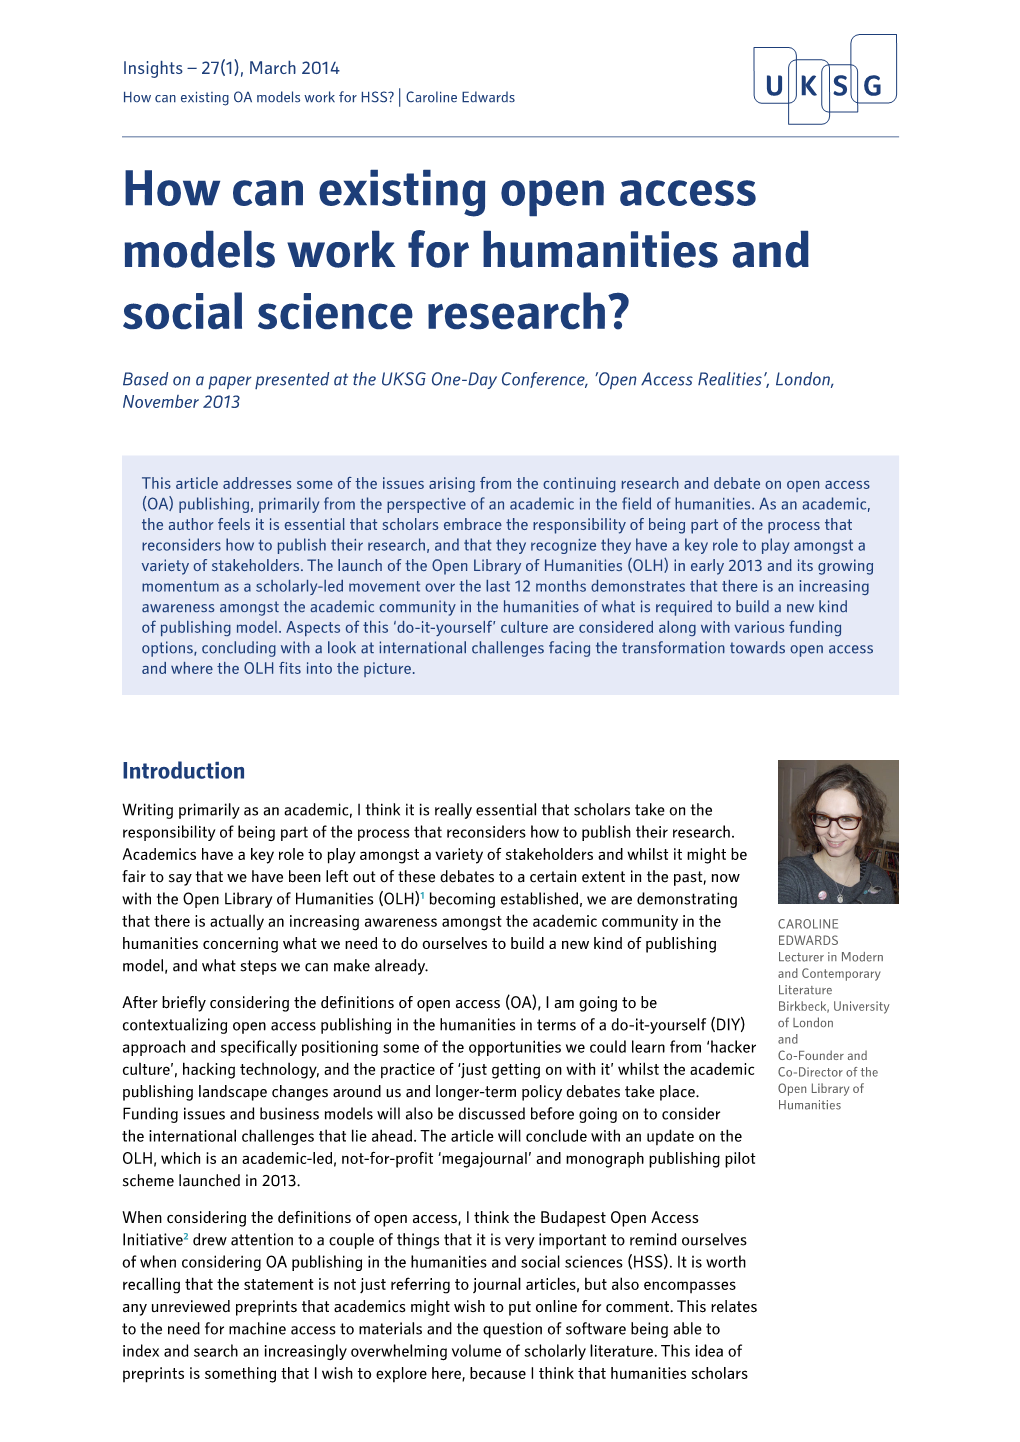 How Can Existing Open Access Models Work for Humanities and Social Science Research?